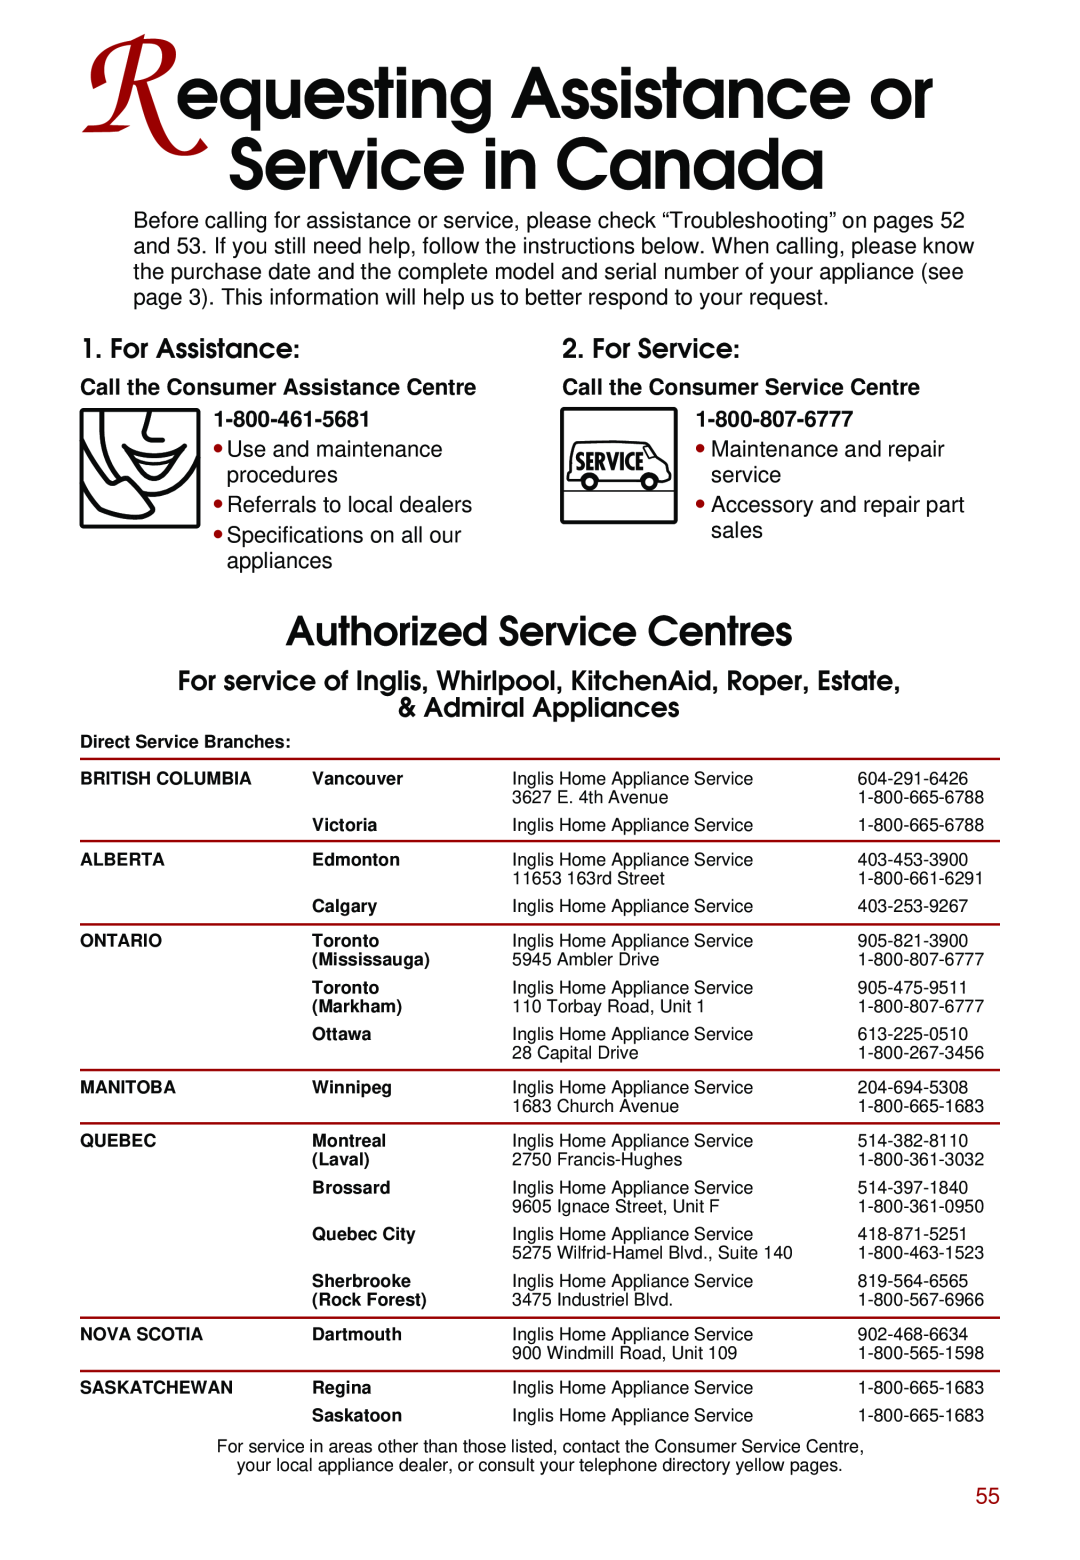 Whirlpool KEBS207D Requesting Assistance or Service in Canada, Authorized Service Centres, For Assistance, For Service 